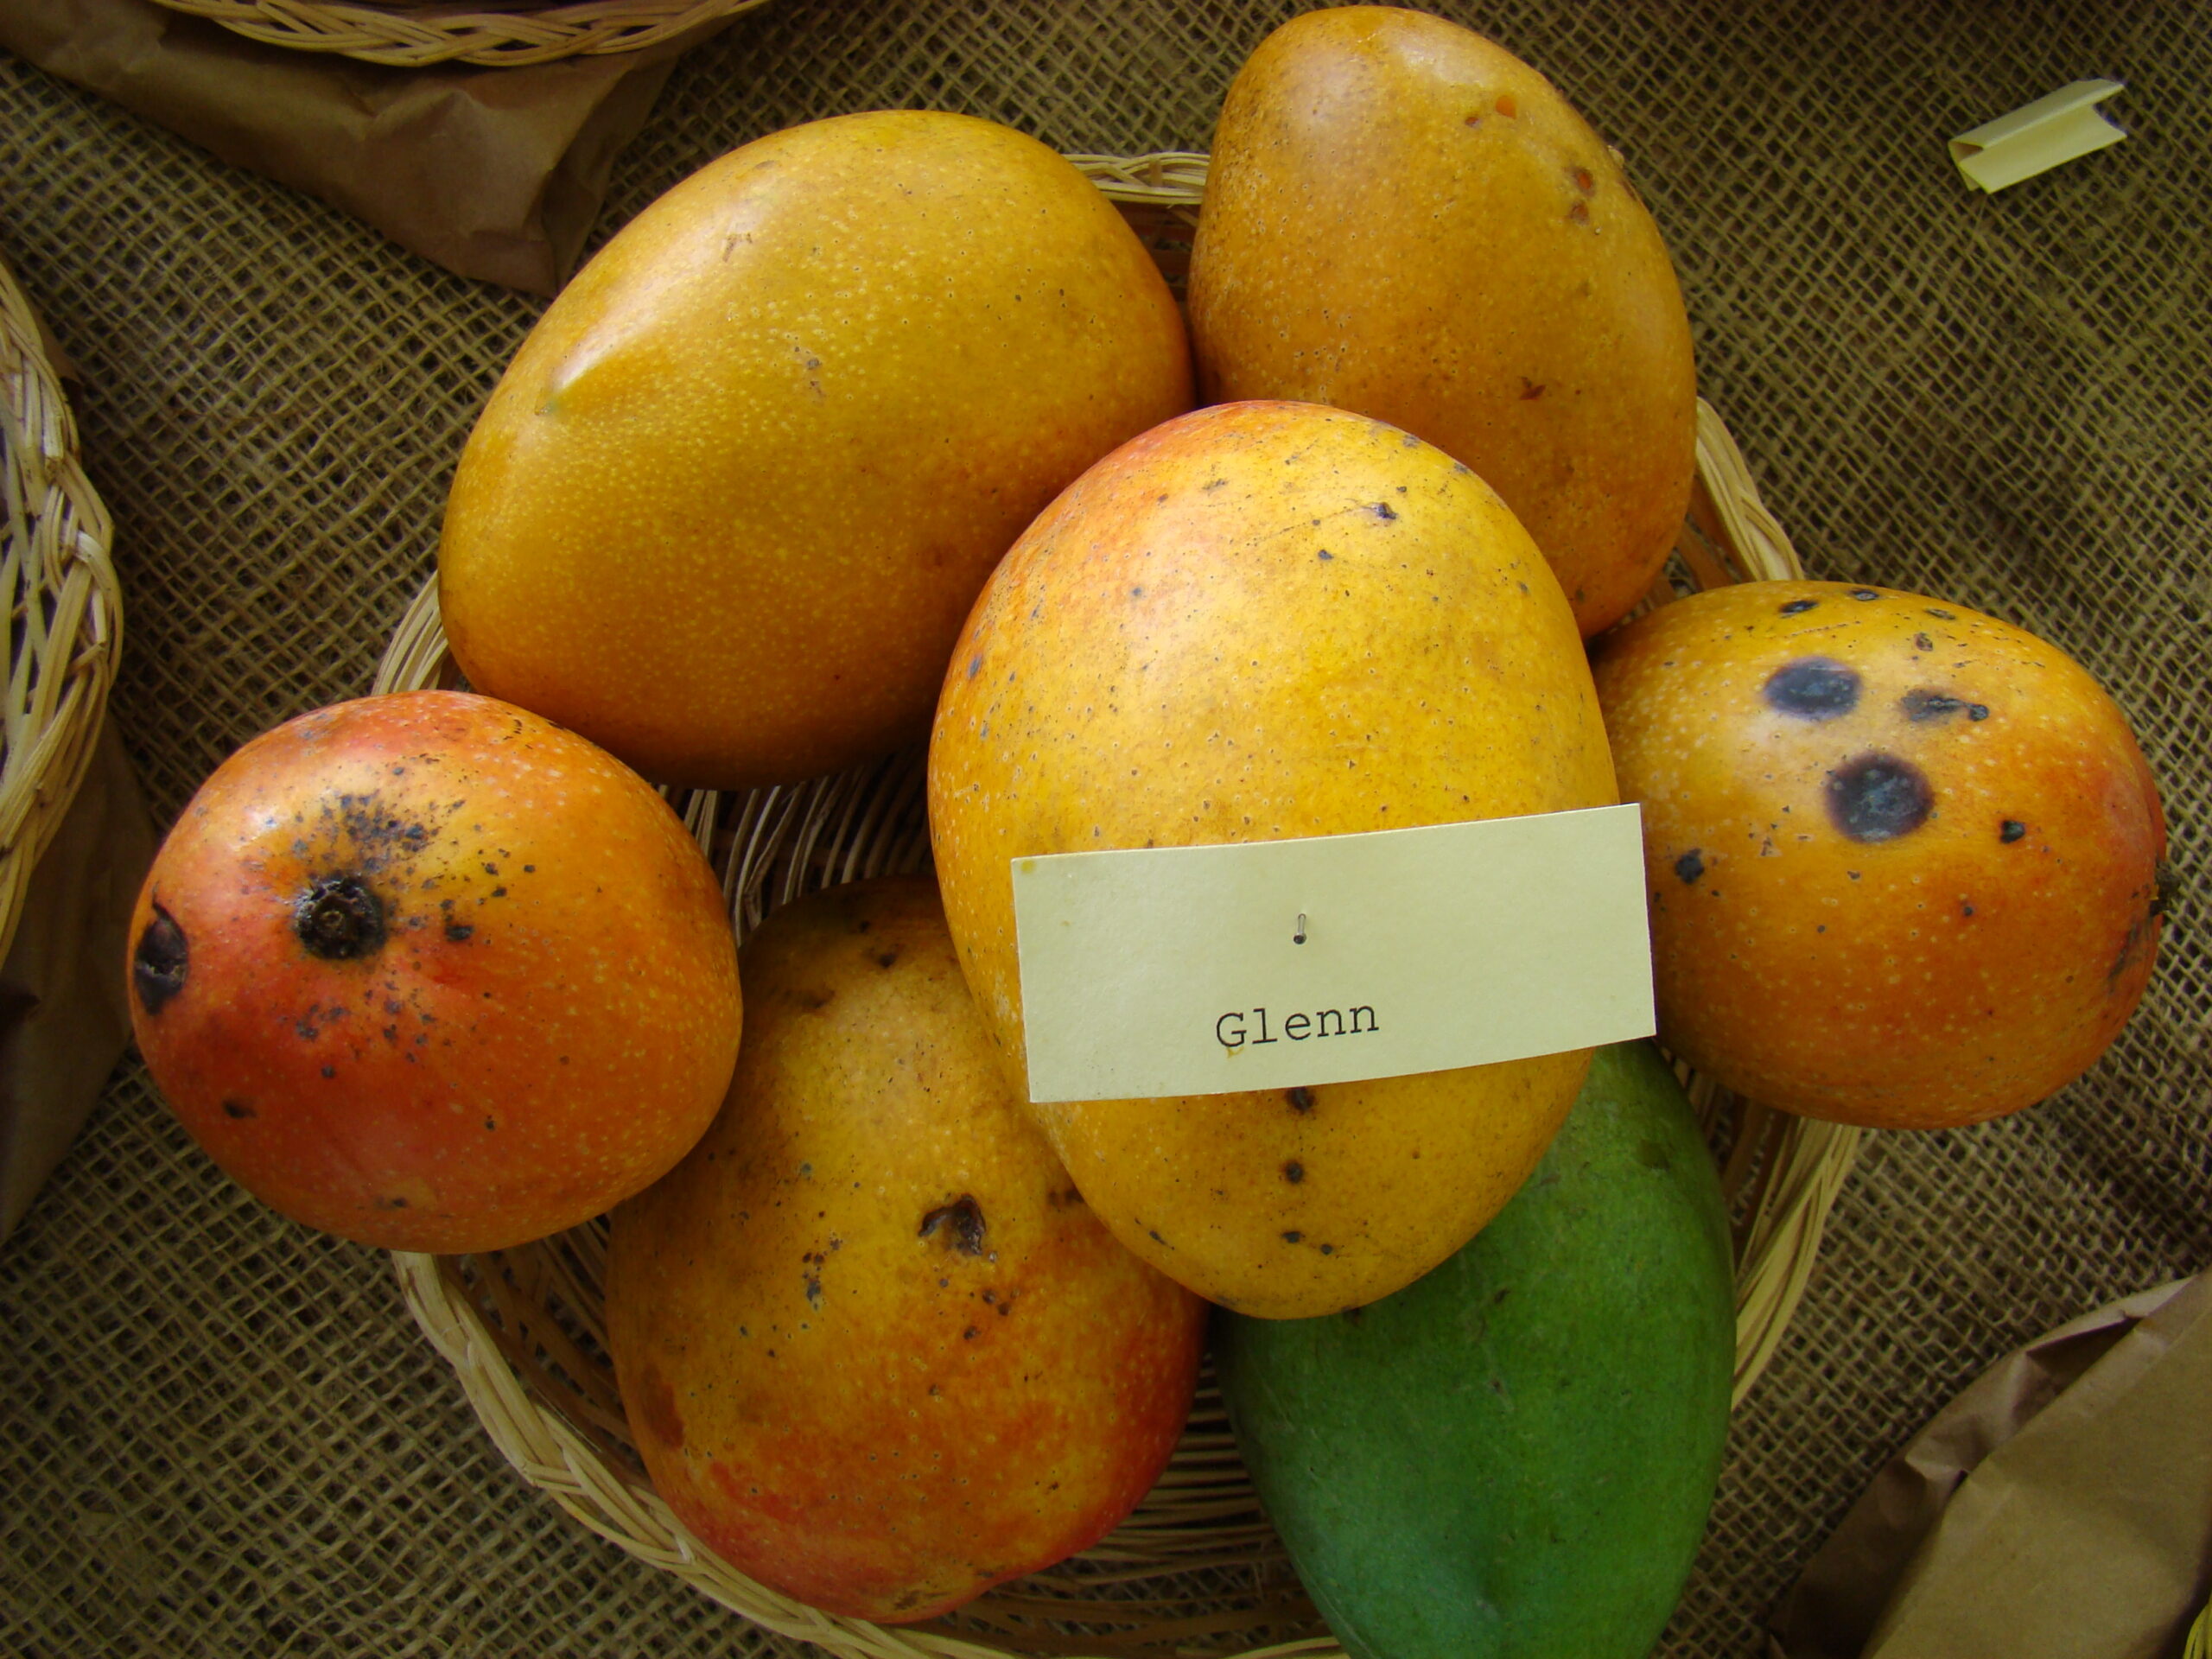 How to identify mangoes ripened by chemical